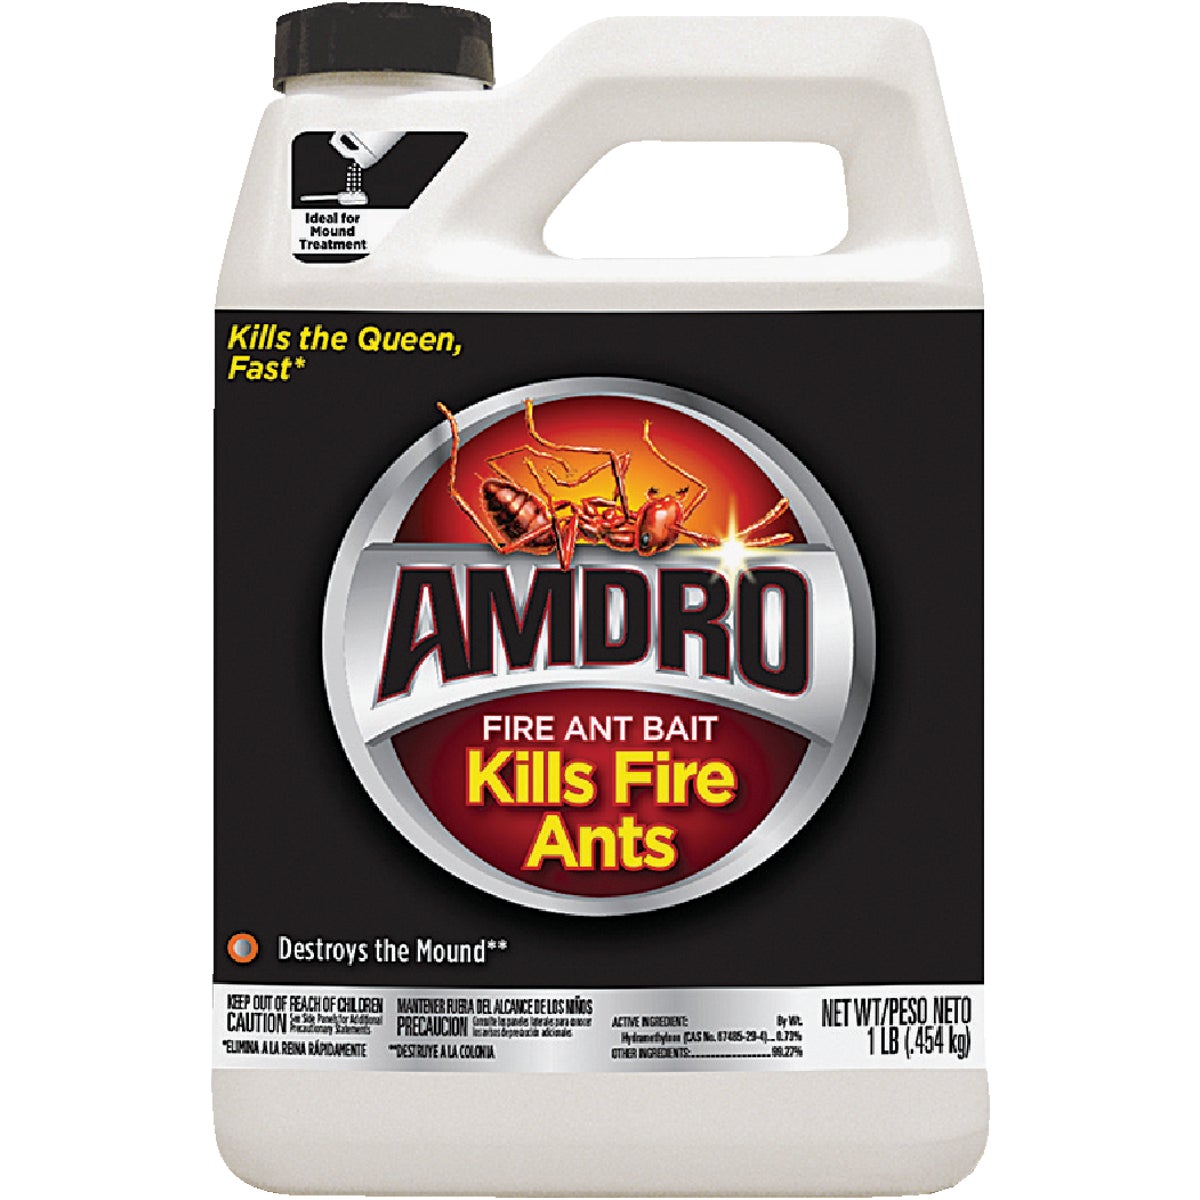 Item 703443, Amdro fire ant killer. Apply when ants are active.